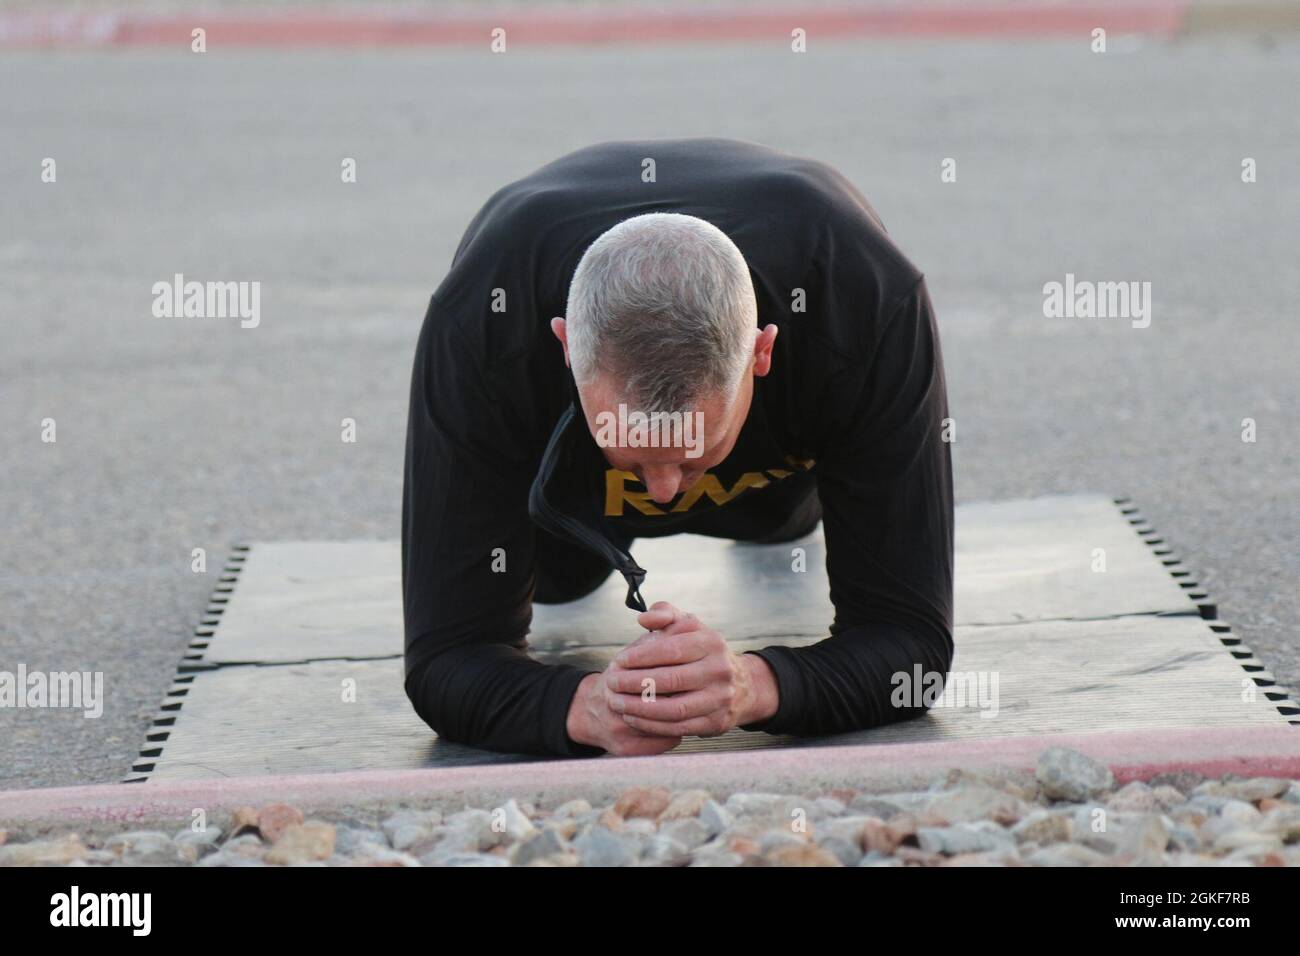 32d AAMDC commanding general, Brig. Gen. Dave Stewart, holds the plank position during ACFT focused circuit training here at Fort Bliss, Texas. Stock Photo